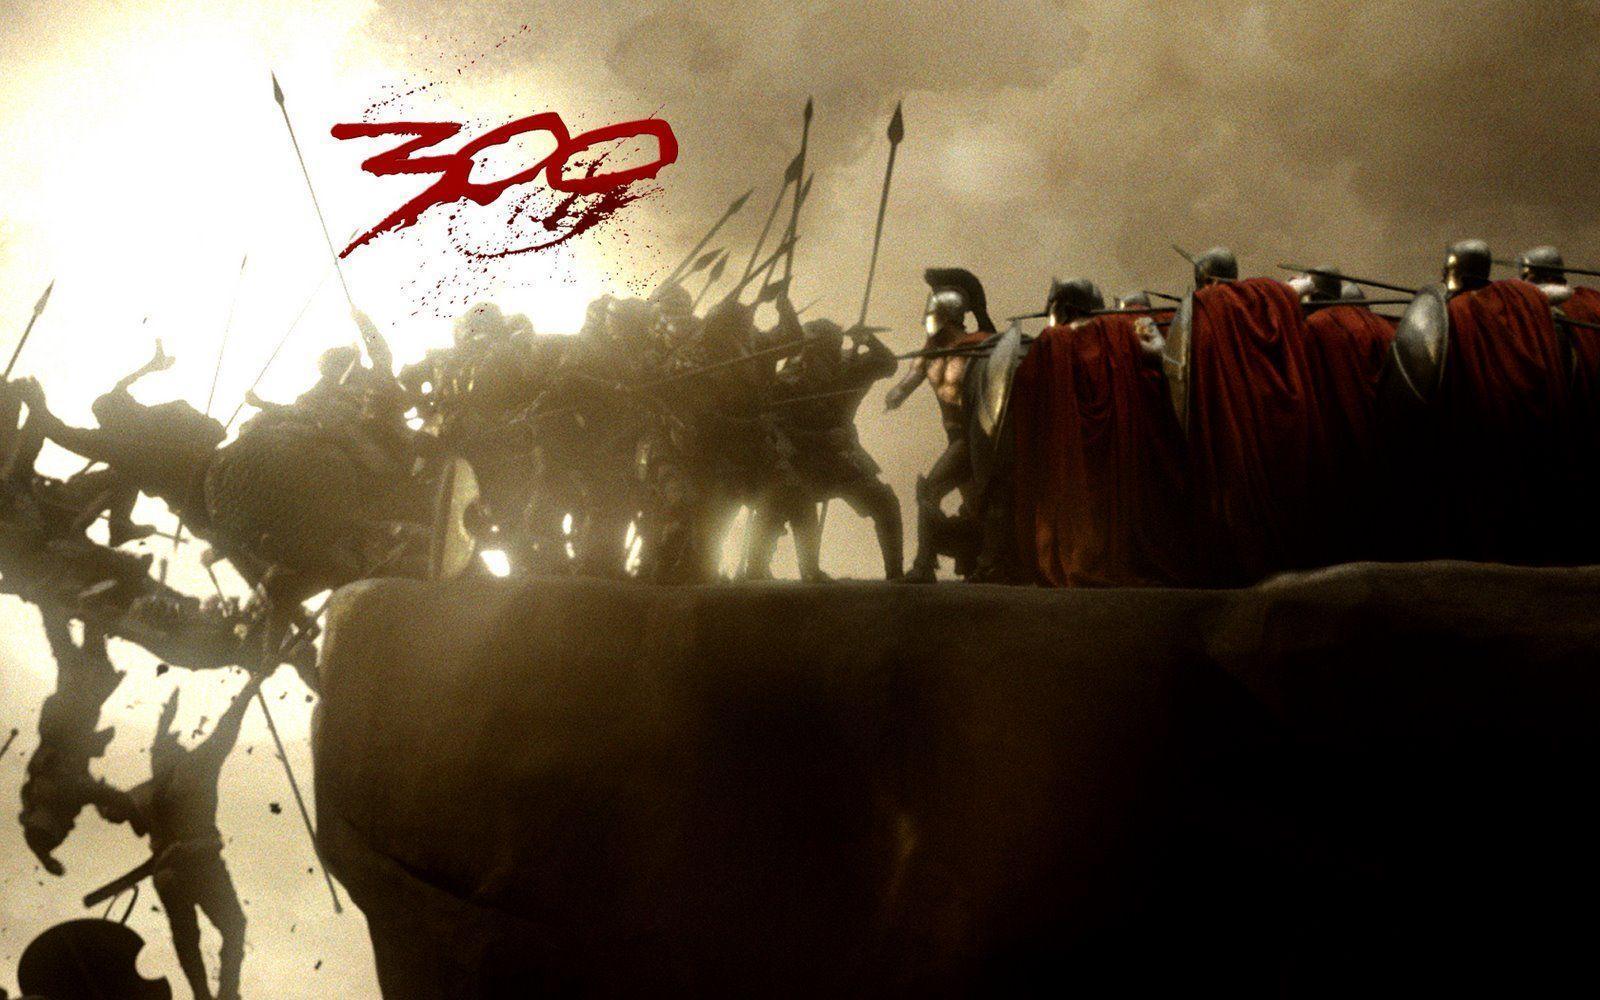 300 Spartans Wallpapers 4361 1600x1000 px